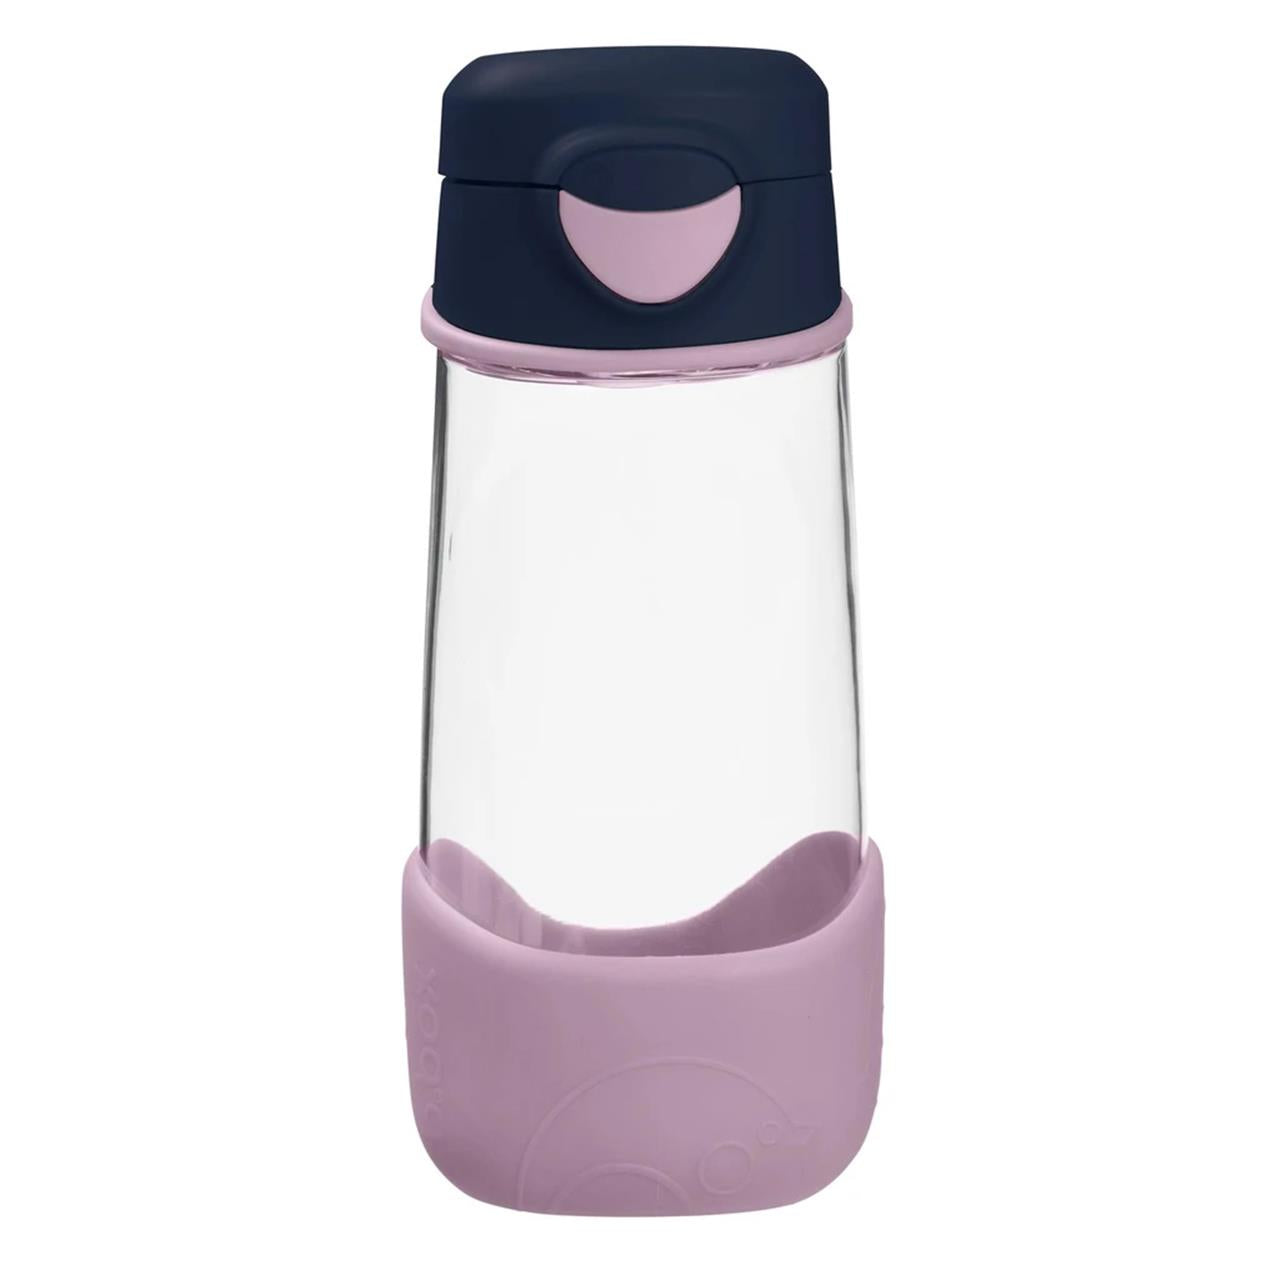 b.box Sport Spout Drink Bottle 450ml in Indigo Rose available at Bear & Moo